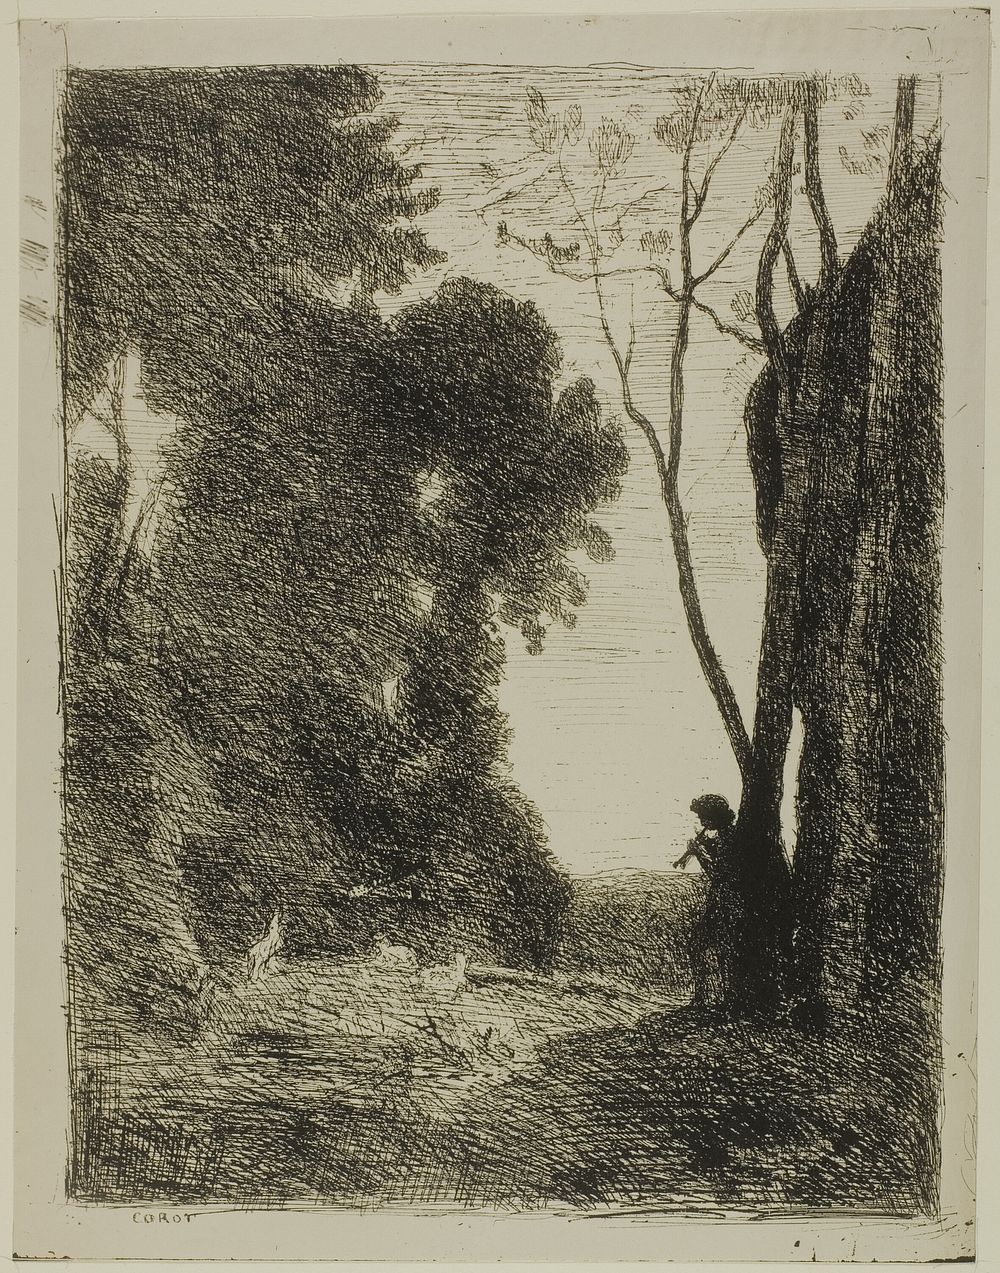 The Young Shepherd, second plate by Jean Baptiste Camille Corot